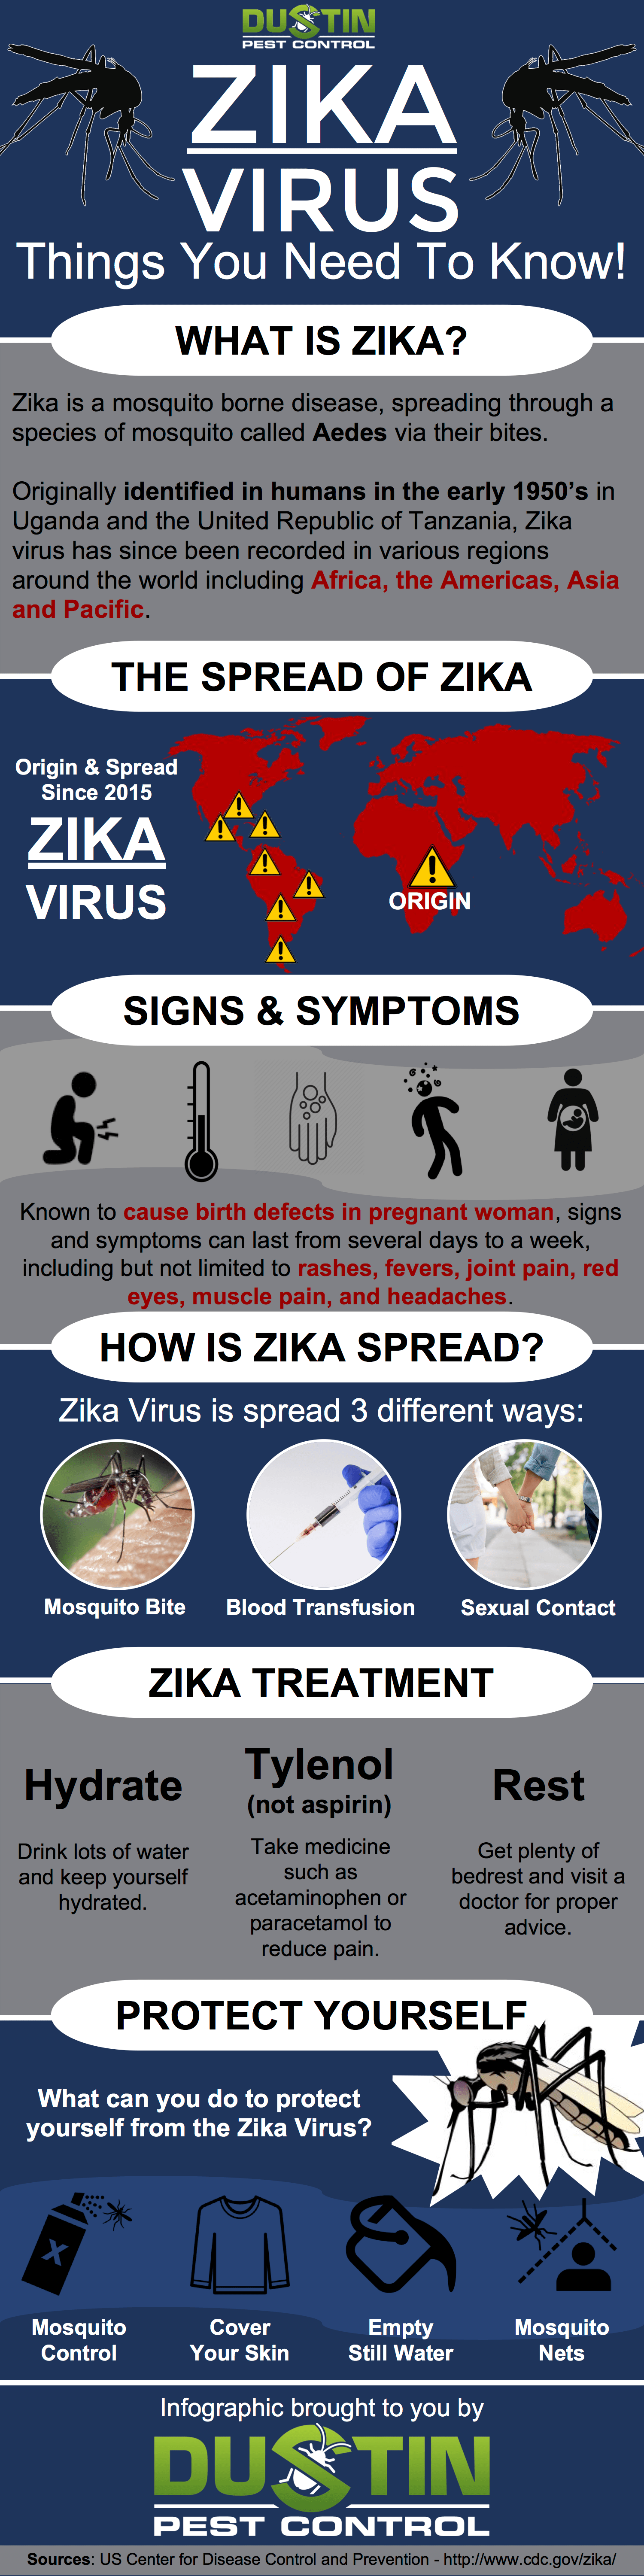 6 Things You Need to Know About the Zika Virus